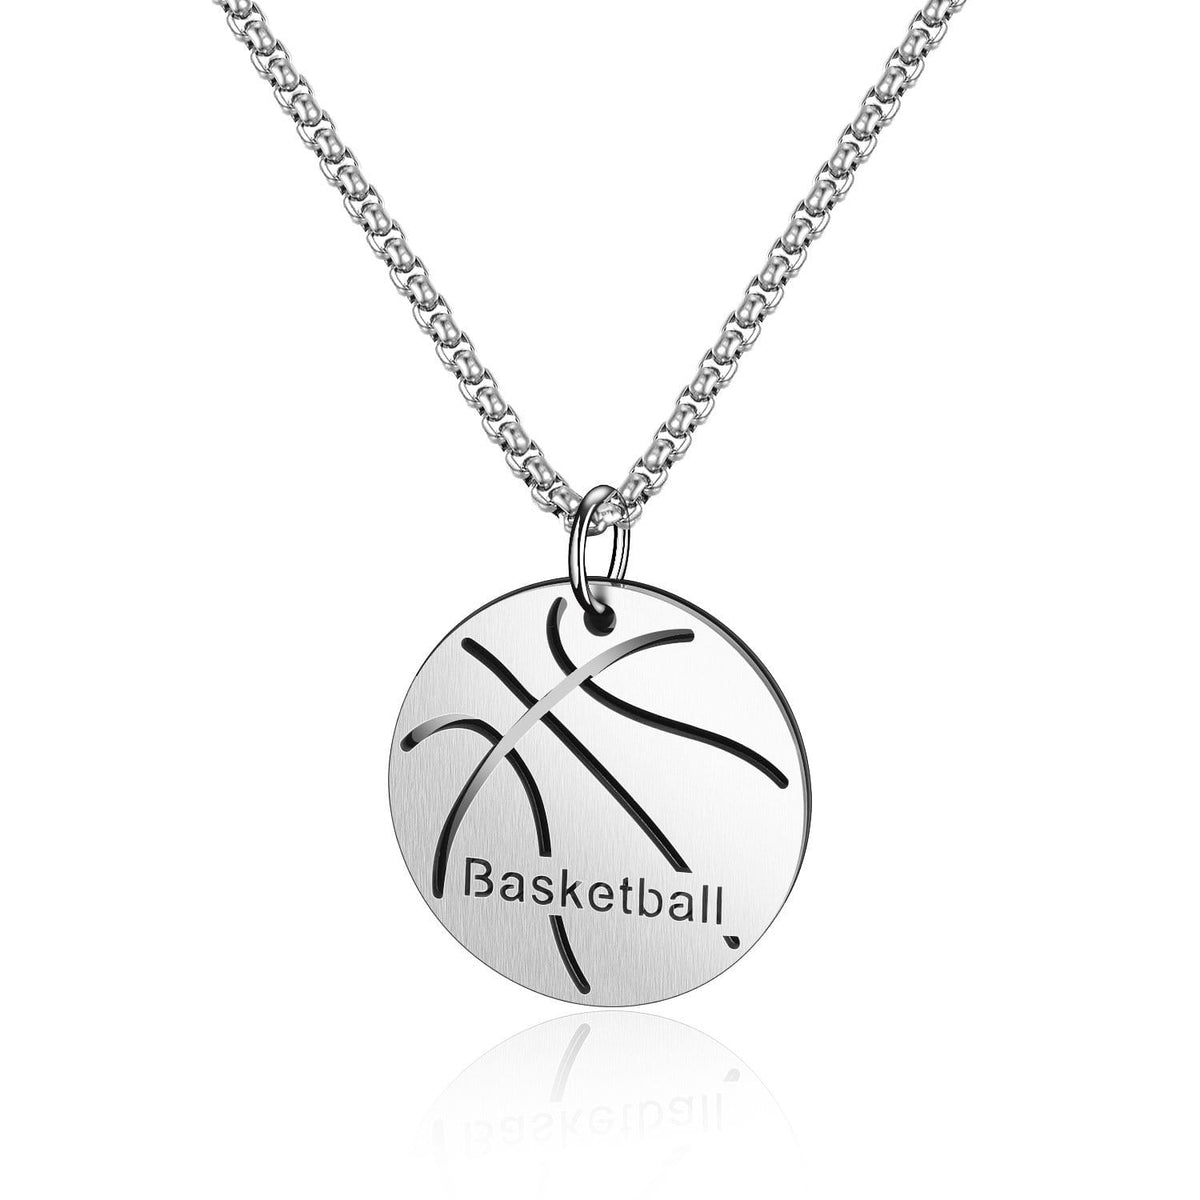 Stainless Steel Basketball Necklace